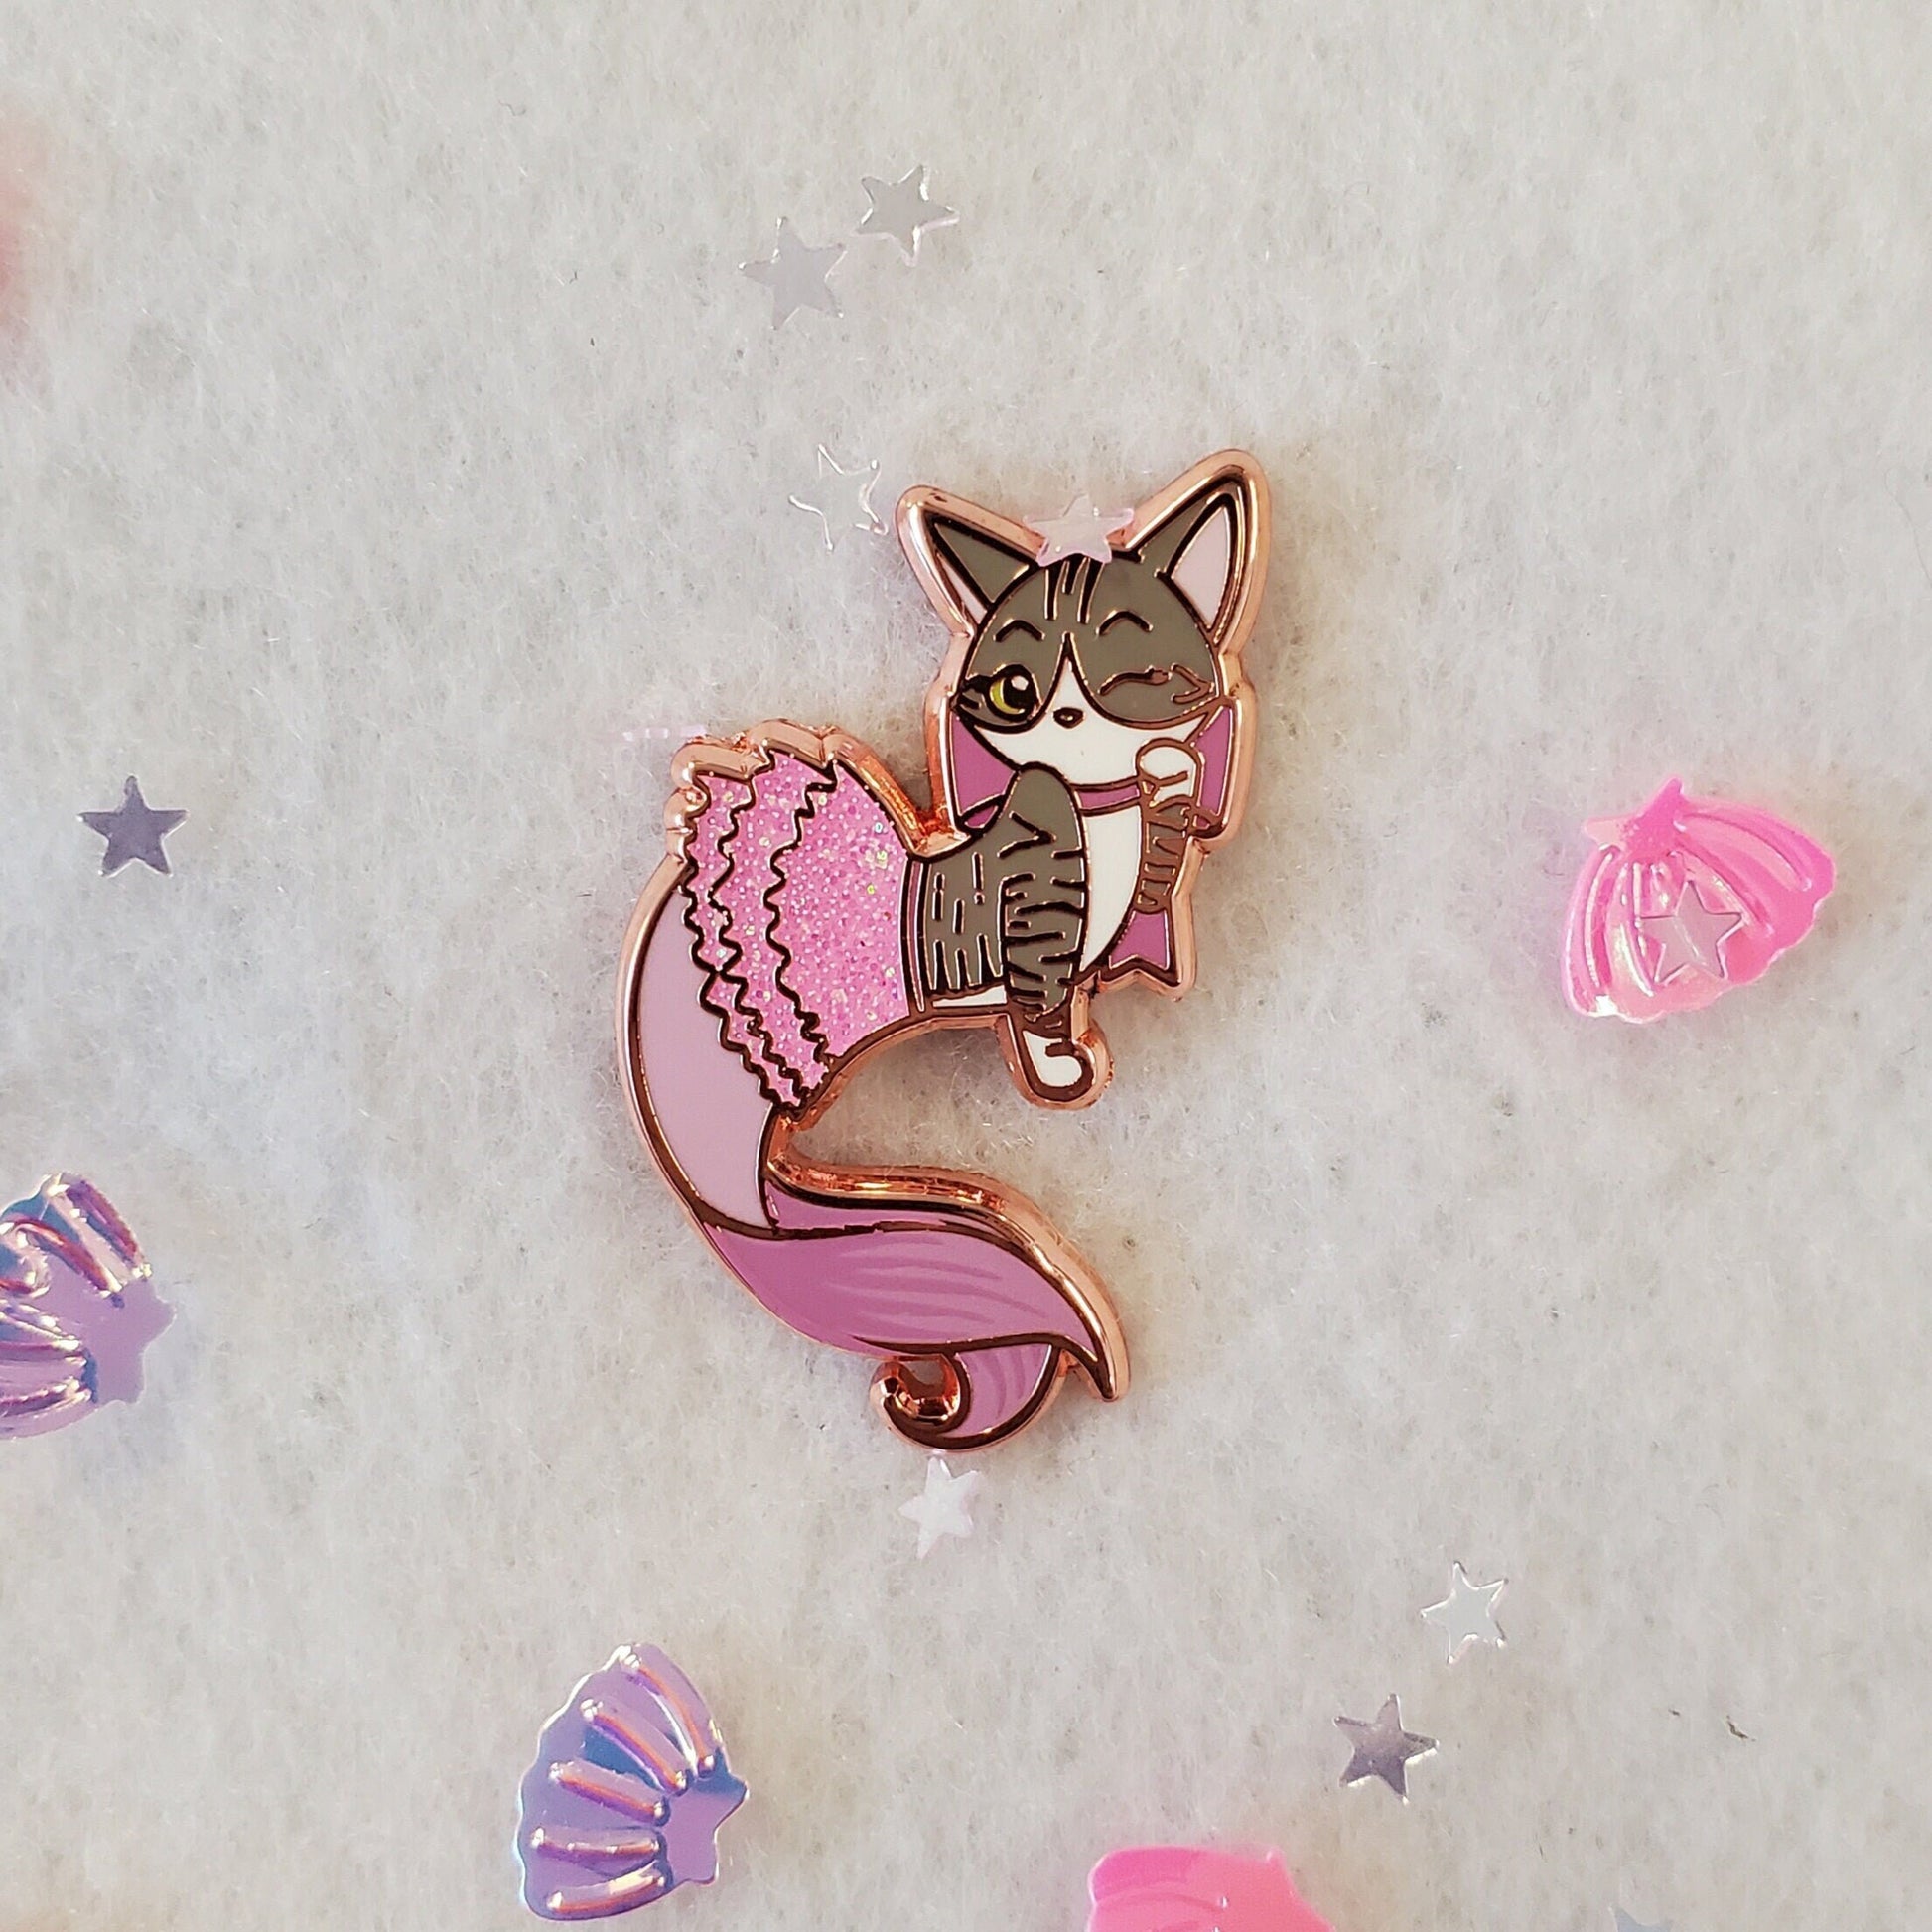 Purrmaid Aoife (Purrmaid of the Month, February 2022) - Small Enamel Pin, Charity Pin, Pins, Brooches & Lapel Pins